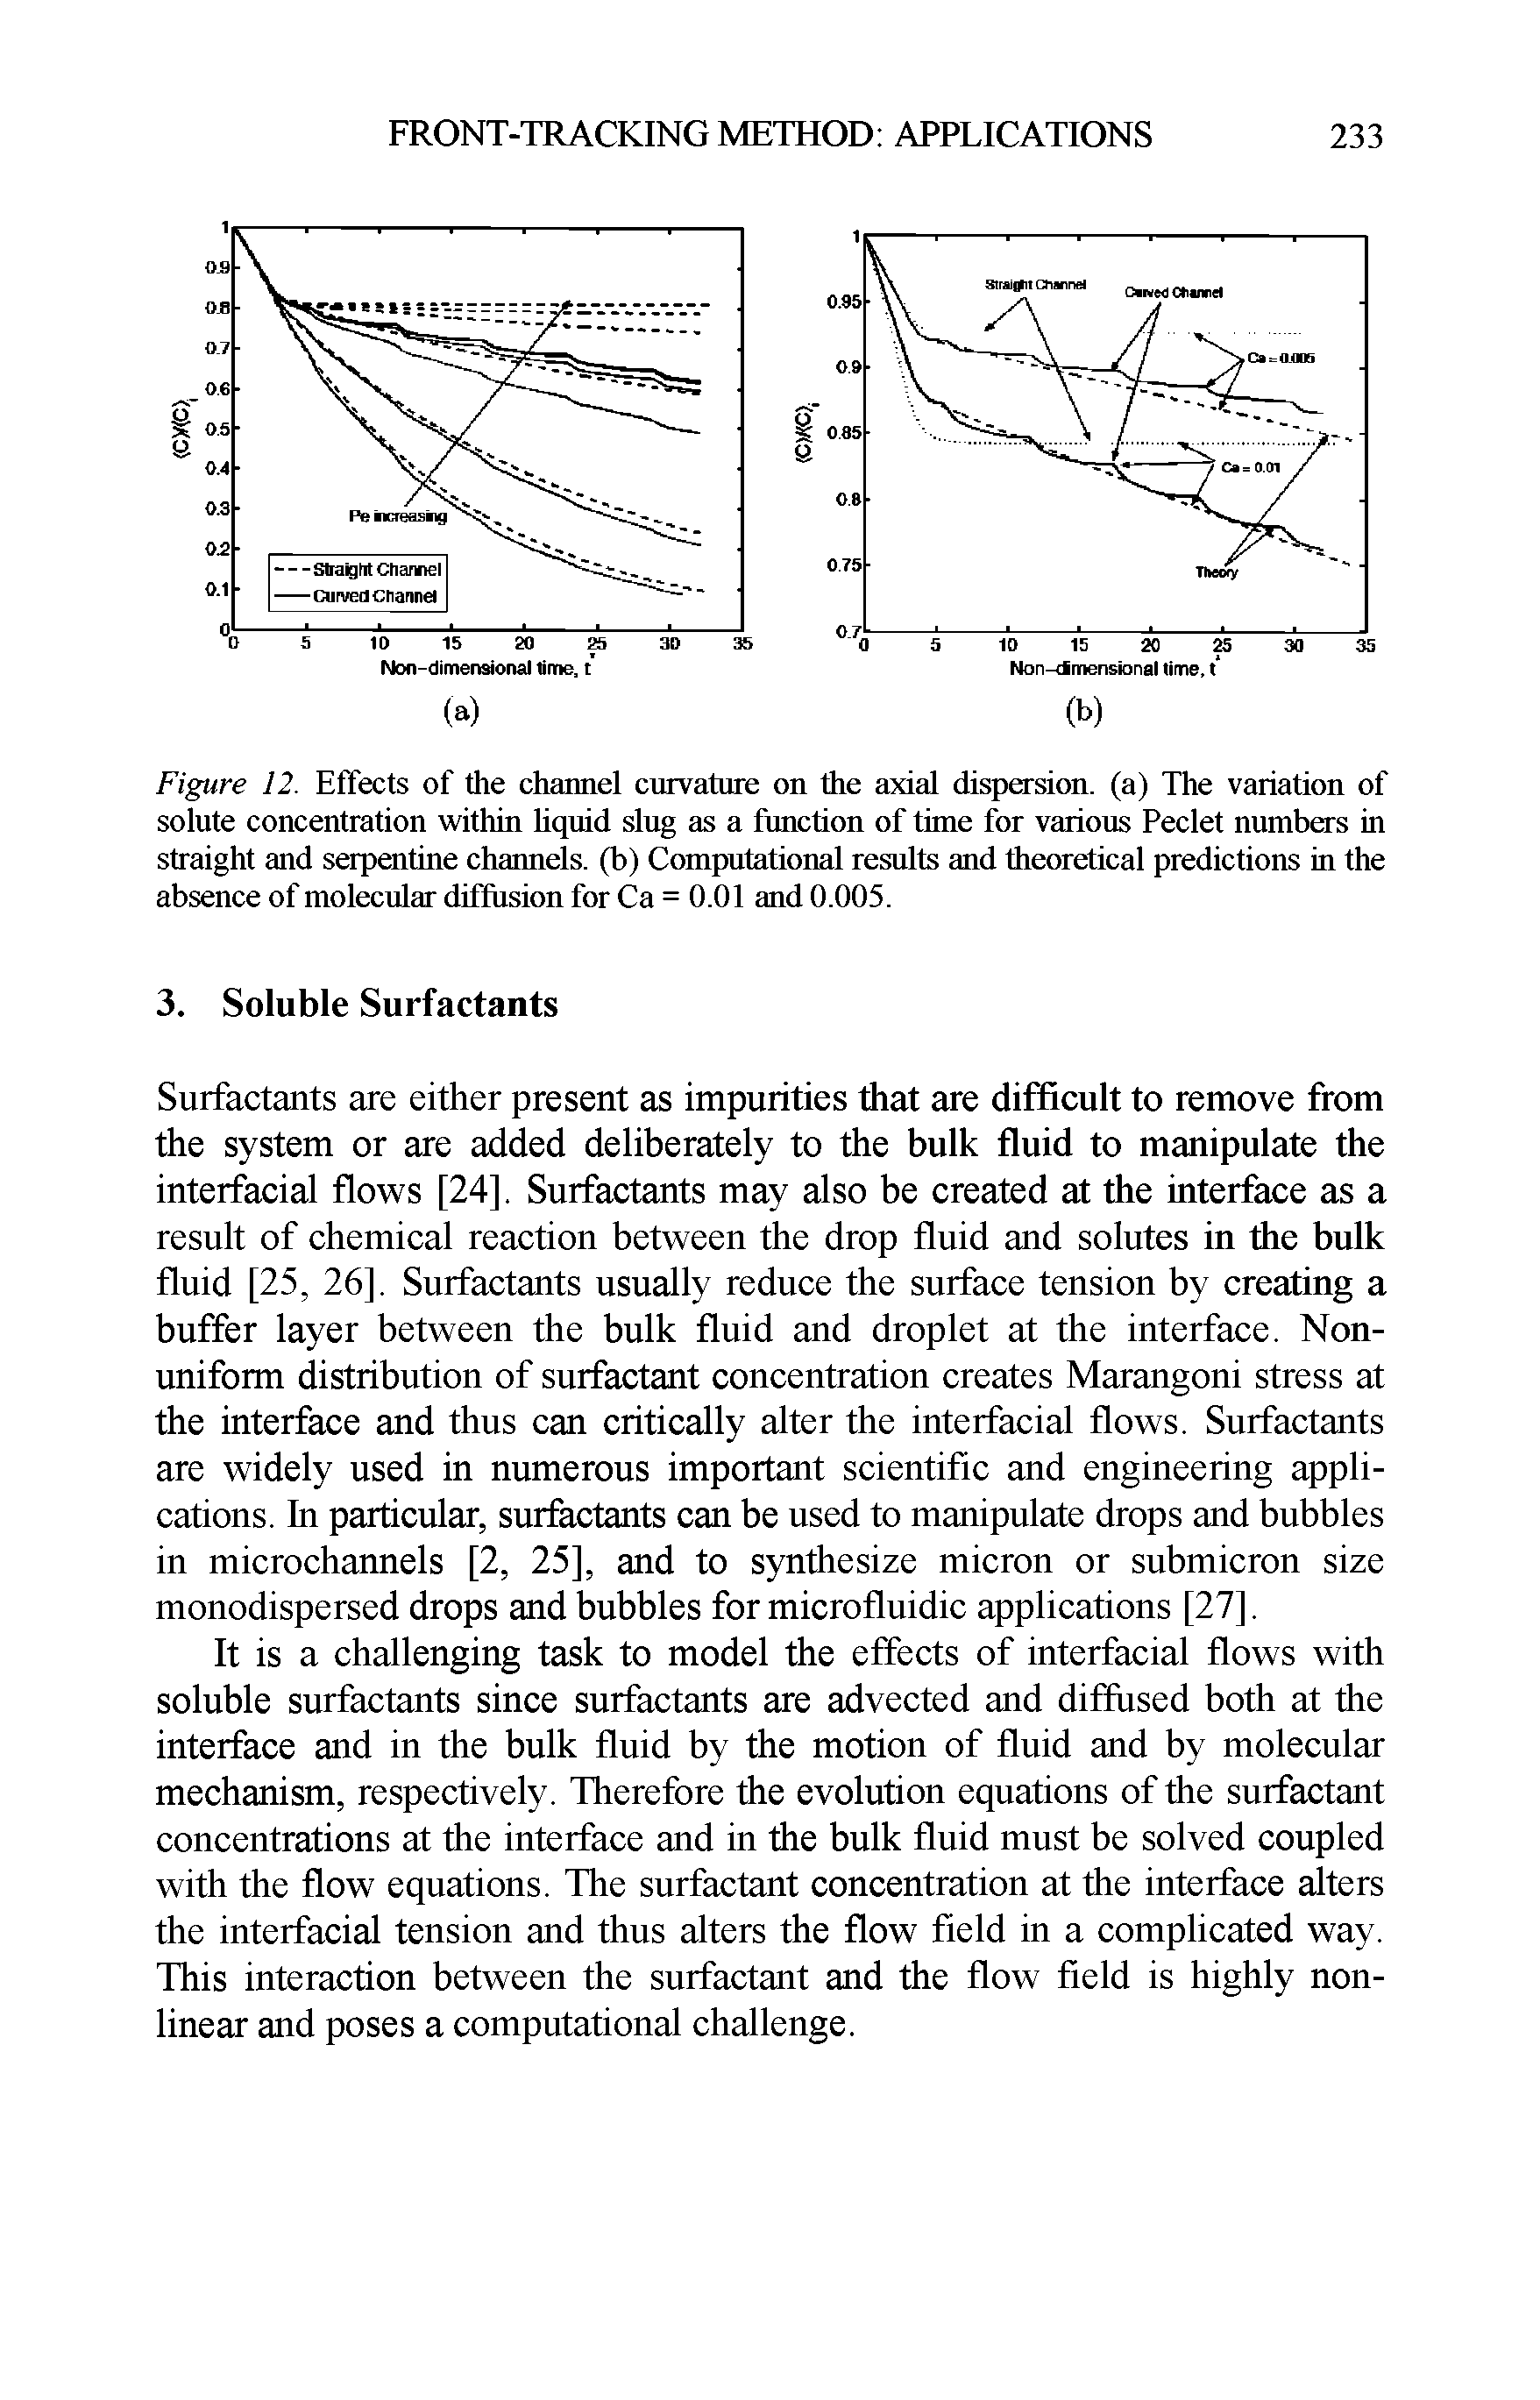 Figure 12. Effects of the channel curvature on the axial dispersion, (a) The variation of solute concentration within hquid slug as a function of time for various Peclet numbers in straight and serpentine channels, (b) Computational results and theoretical predictions in the absence of molecular diffusion for Ca = 0.01 and 0.005.